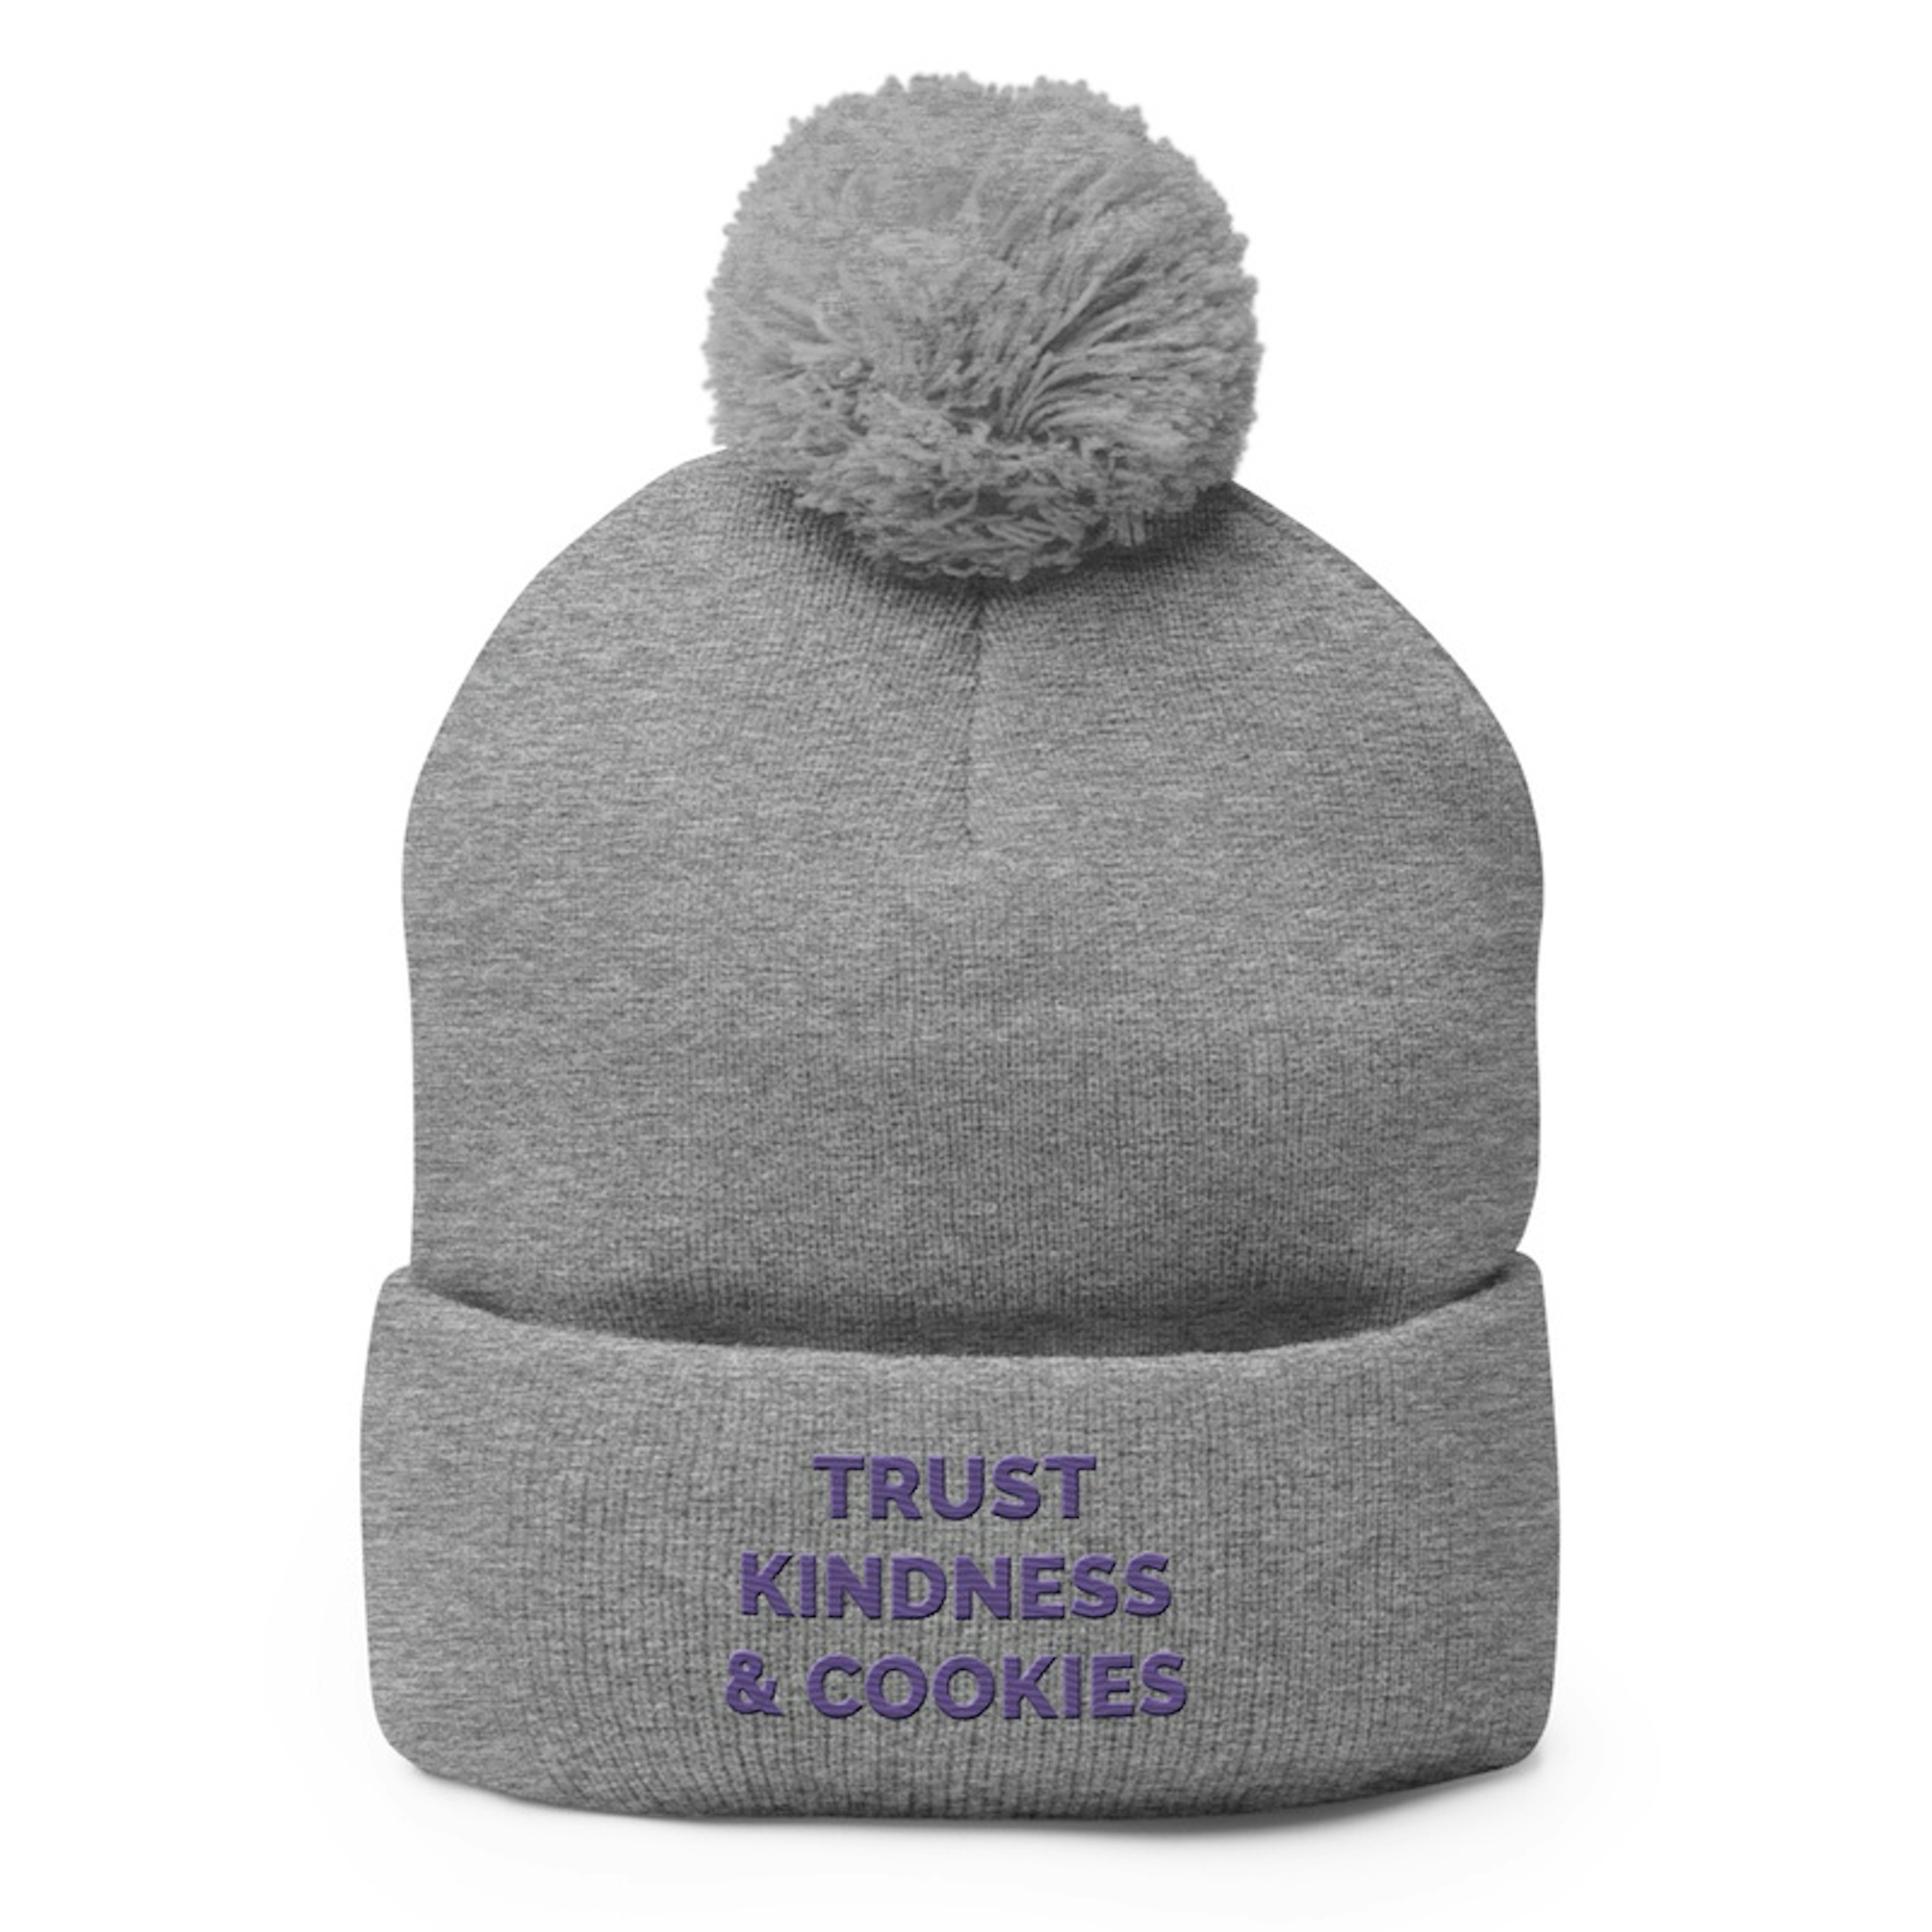 Trust kindness and cookies pompom hat